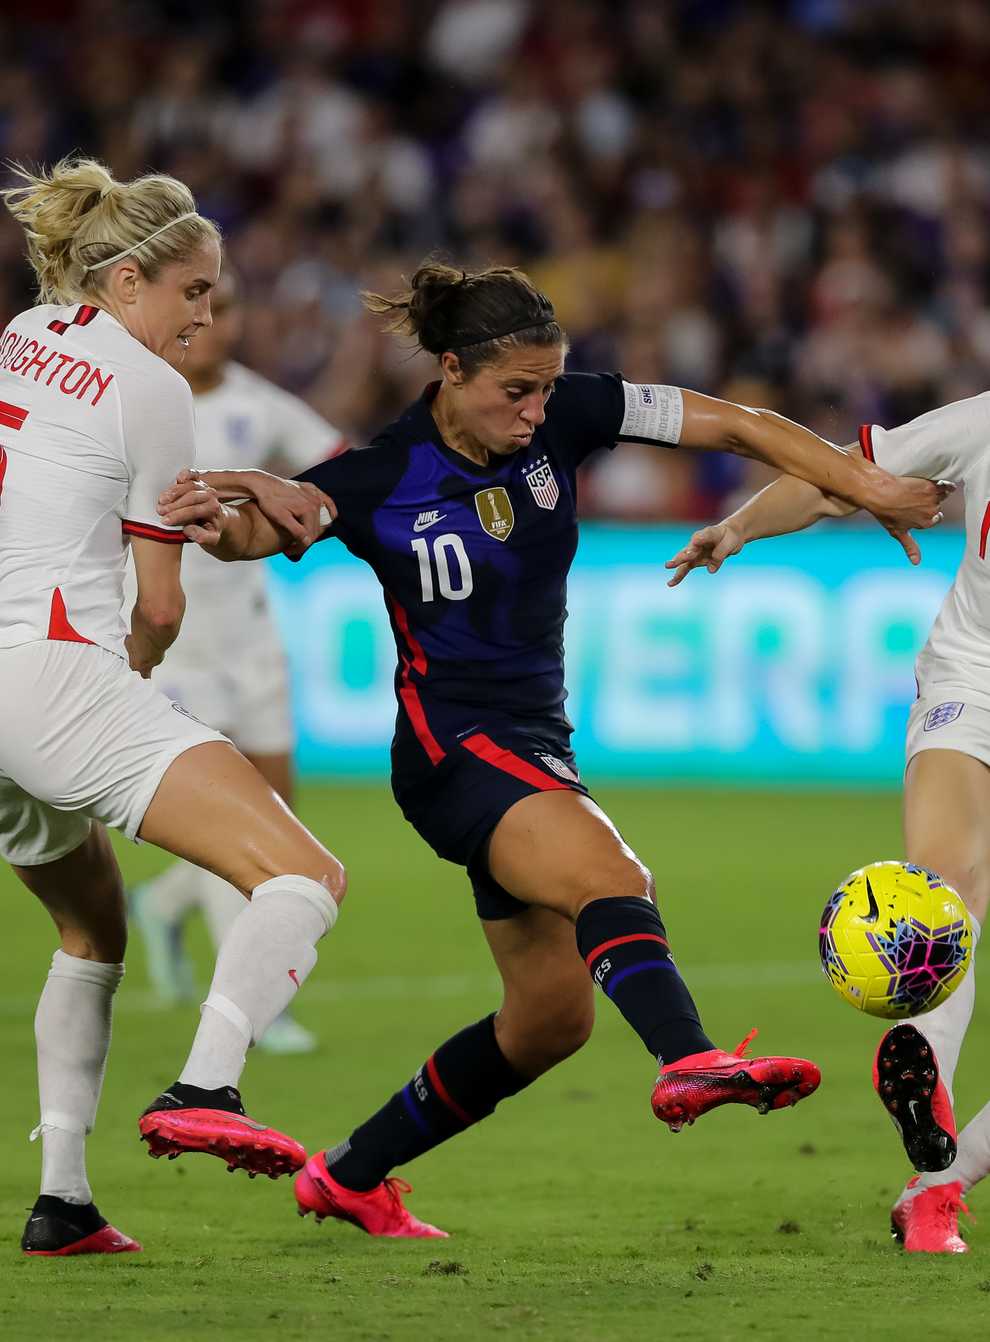 England have said they won’t take part in the SheBelieves Cup